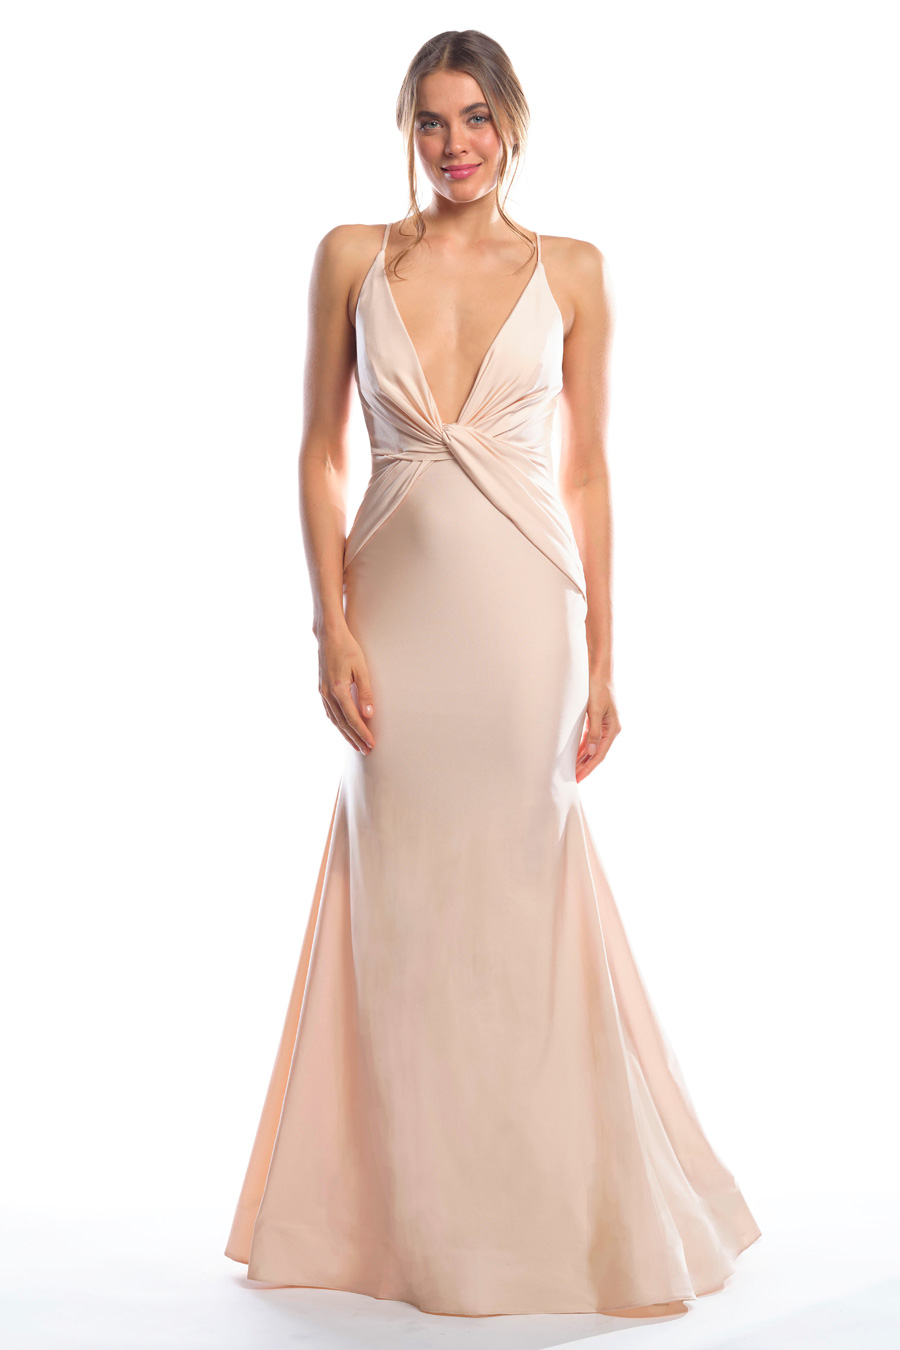 Deep V-neck bodice with twist front draping on hips and trumpet skirt